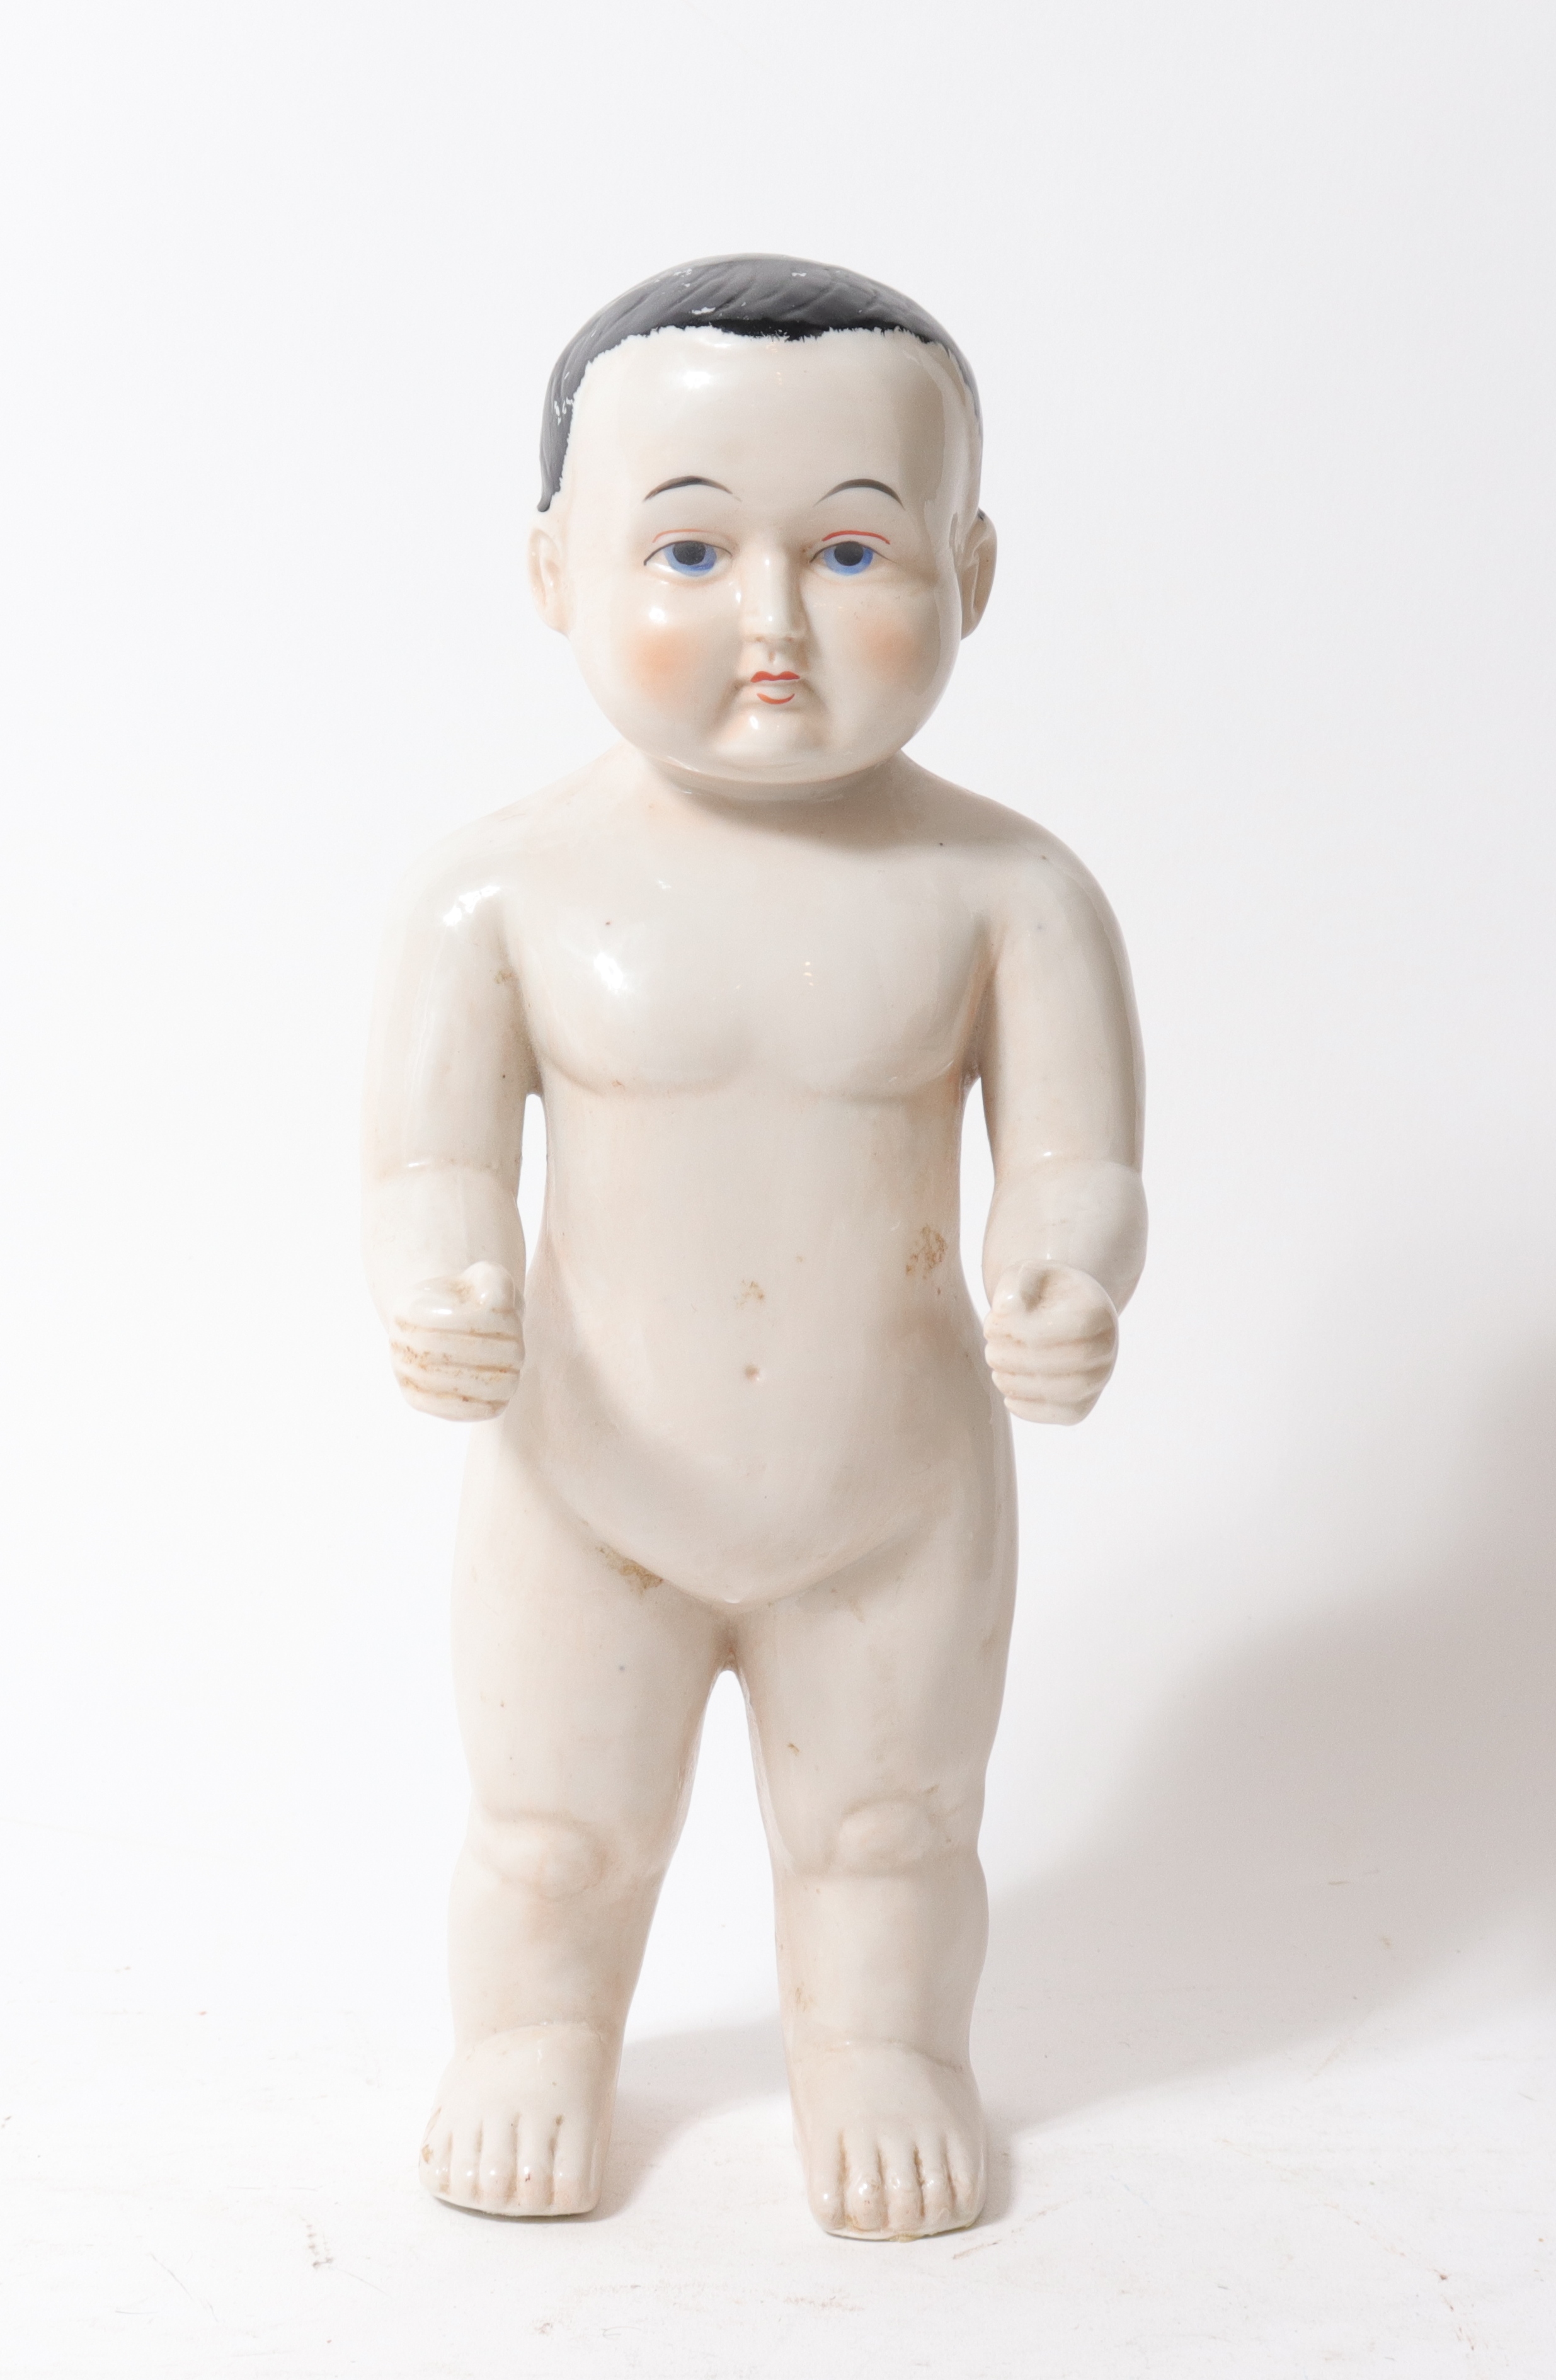 HAND-PAINTED PORCELAIN BABY DOLL